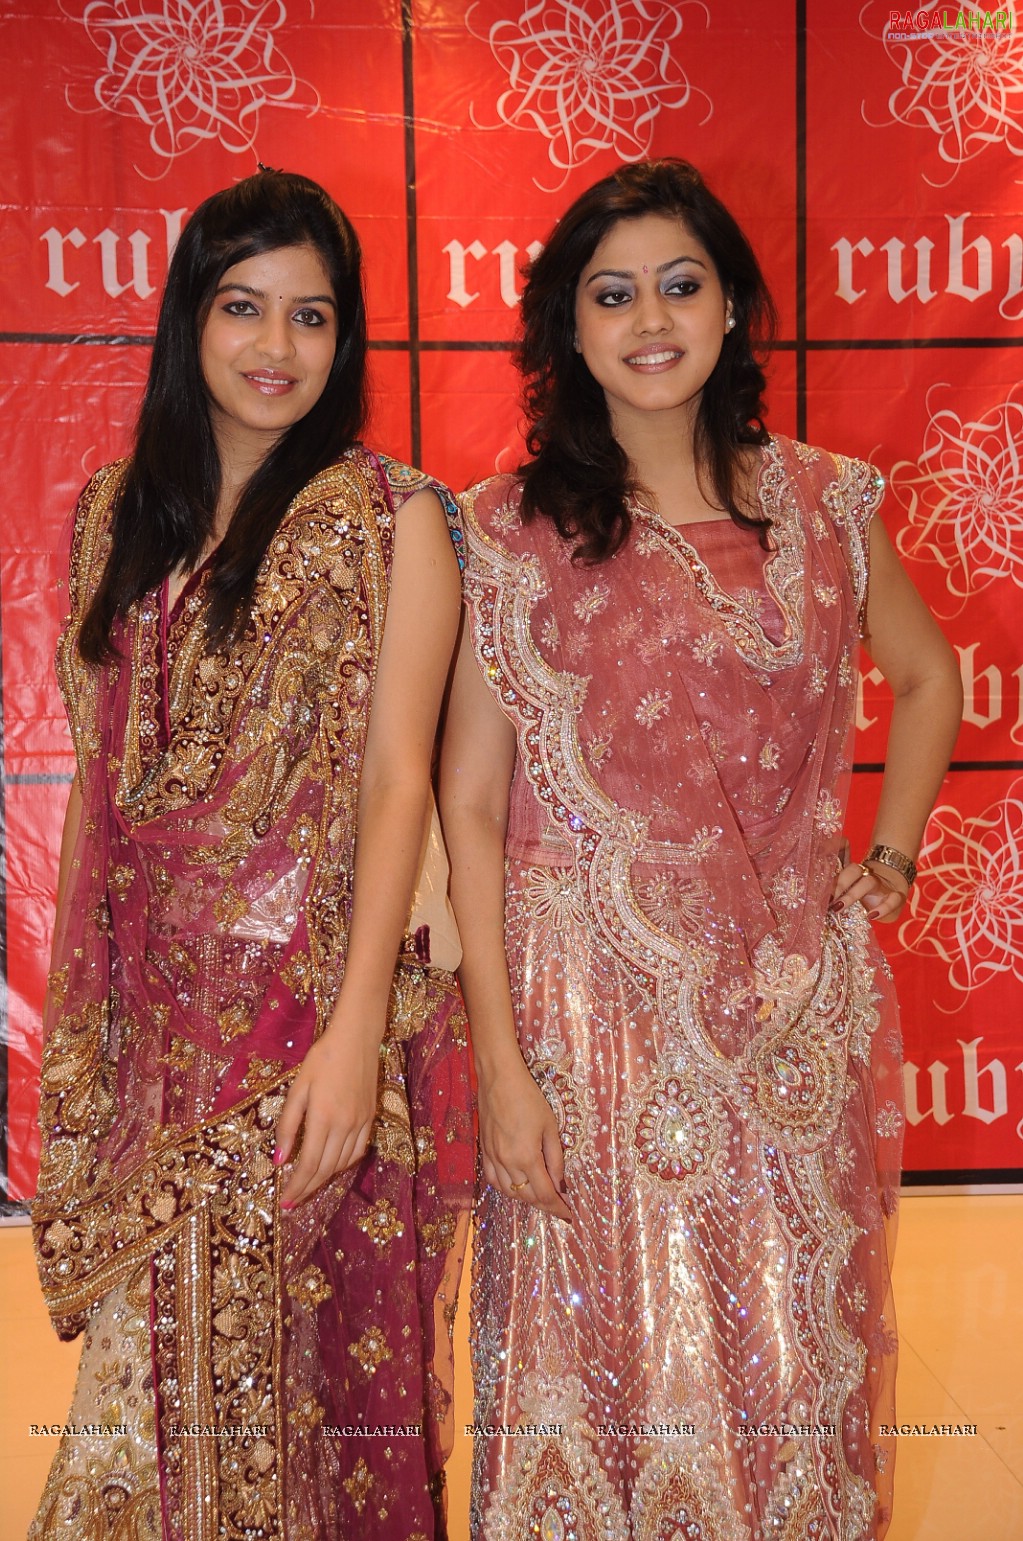 Ruby's Ghagra Sarees Wedding Collection Launch